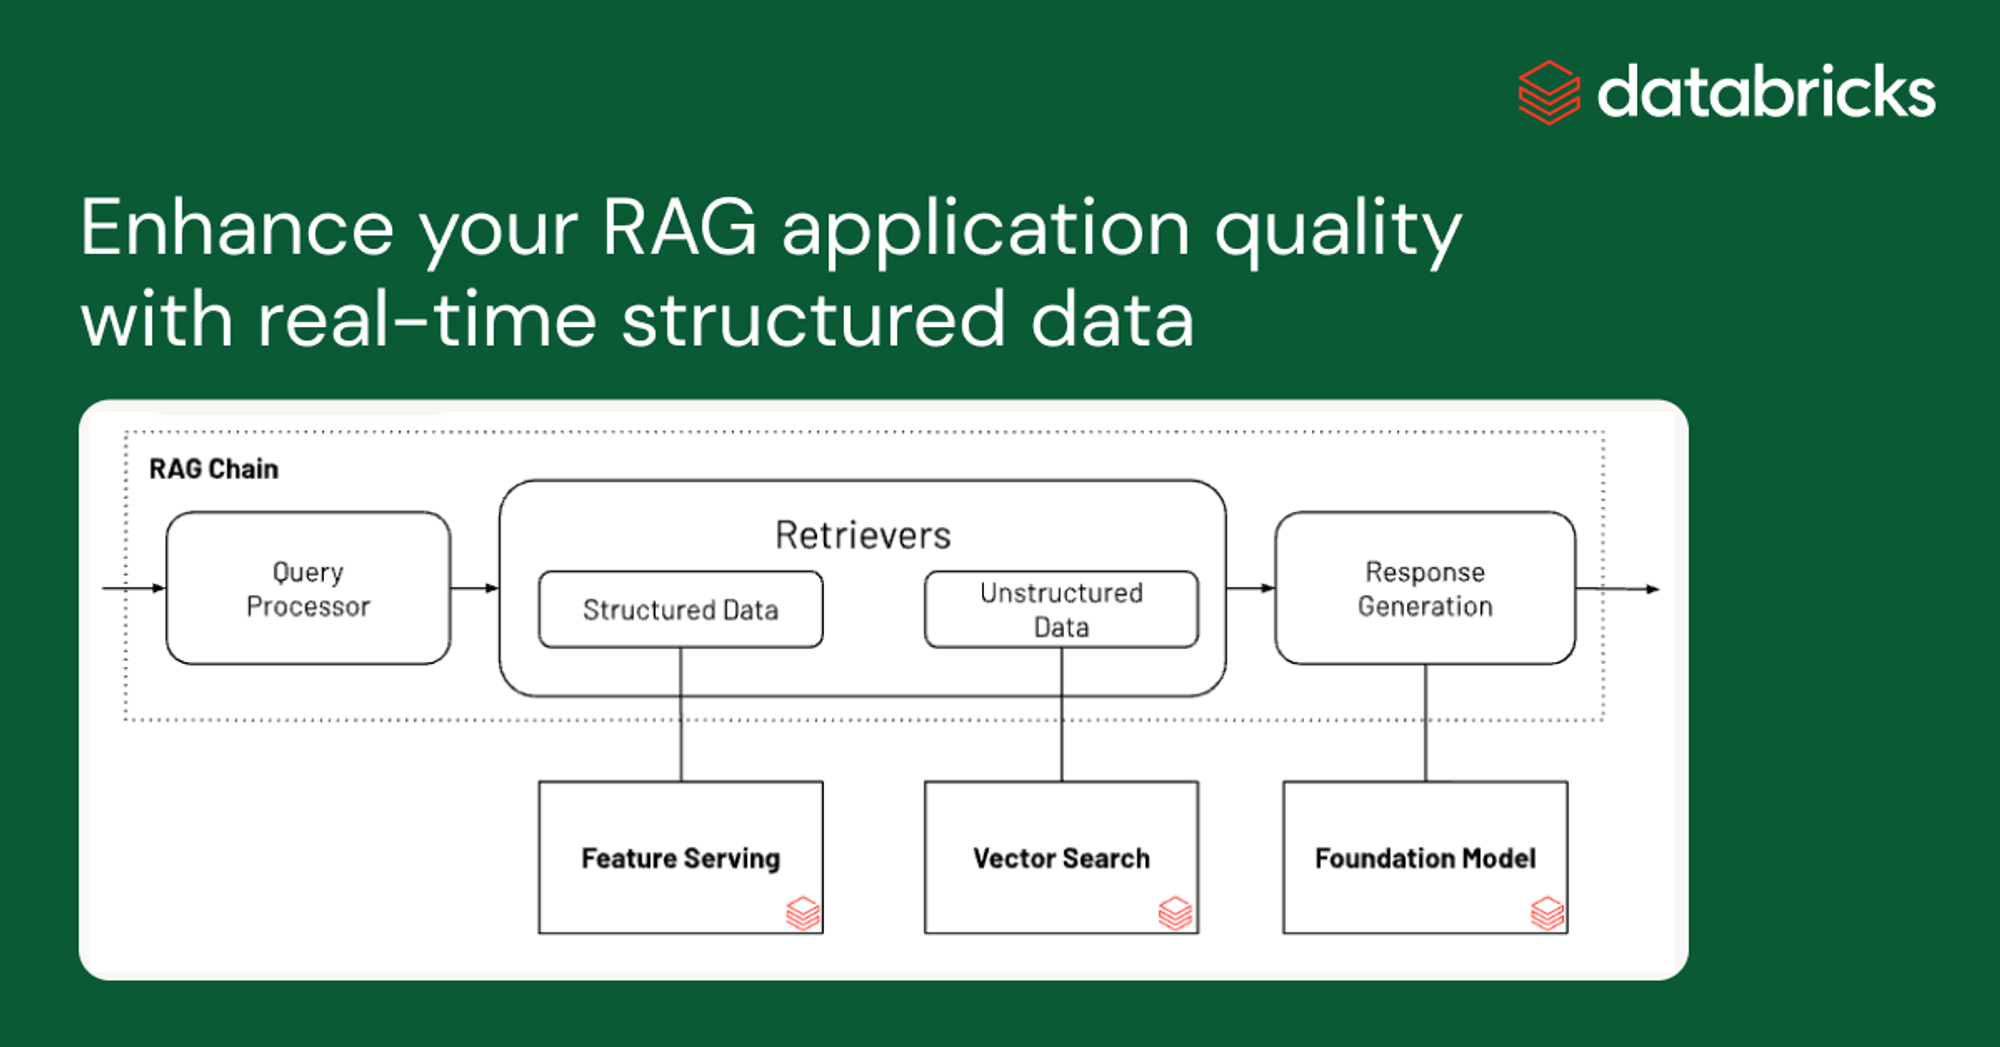 Improve your RAG application response quality with real-time structured data